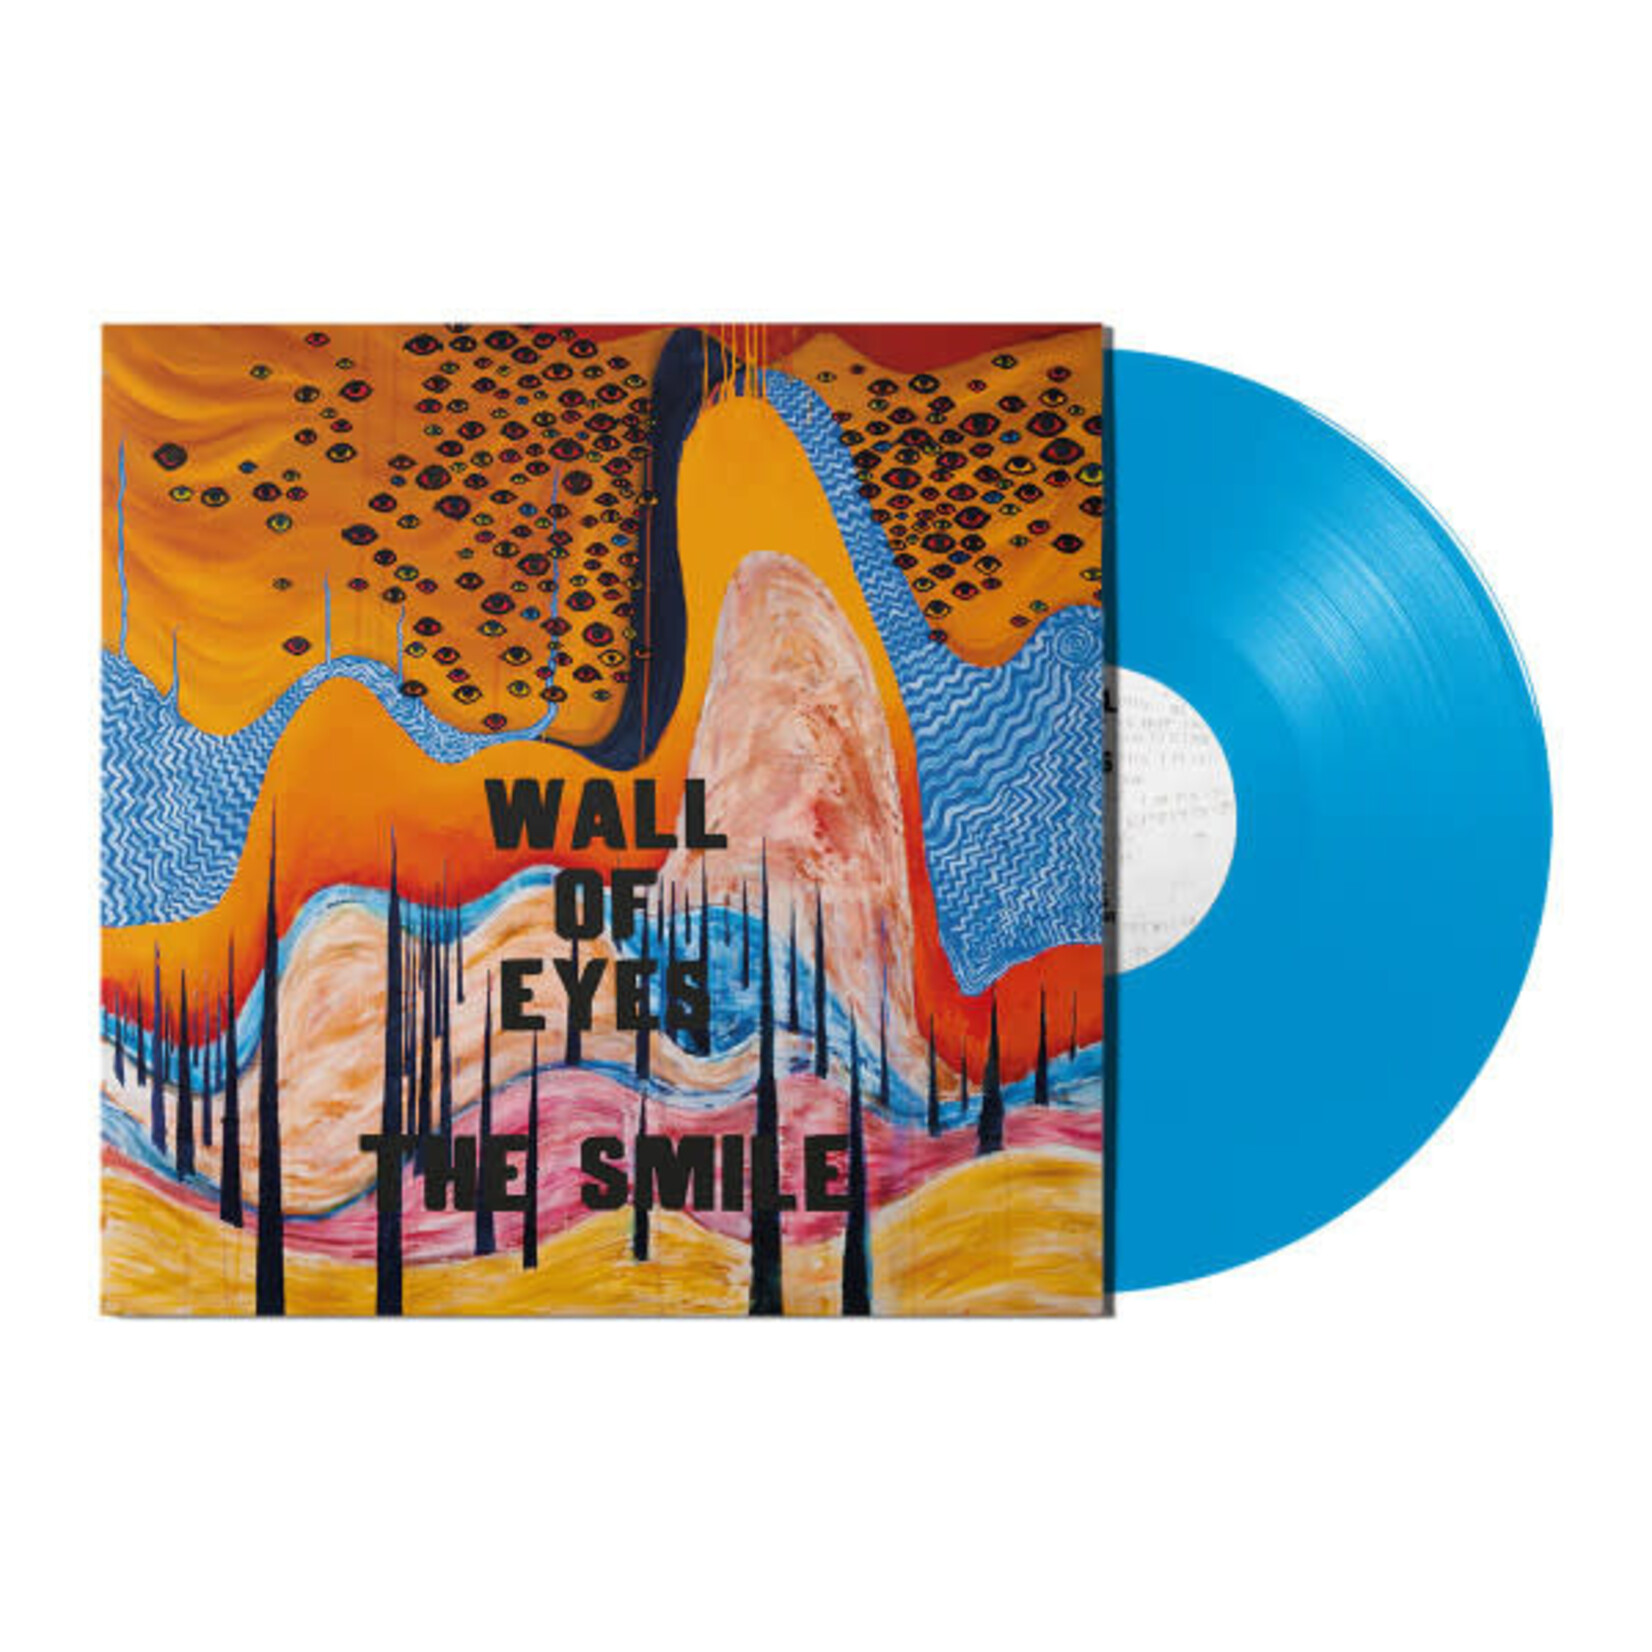 [New] Smile (The): Wall Of Eyes (indie store edition, blue vinyl) [XL  RECORDINGS]